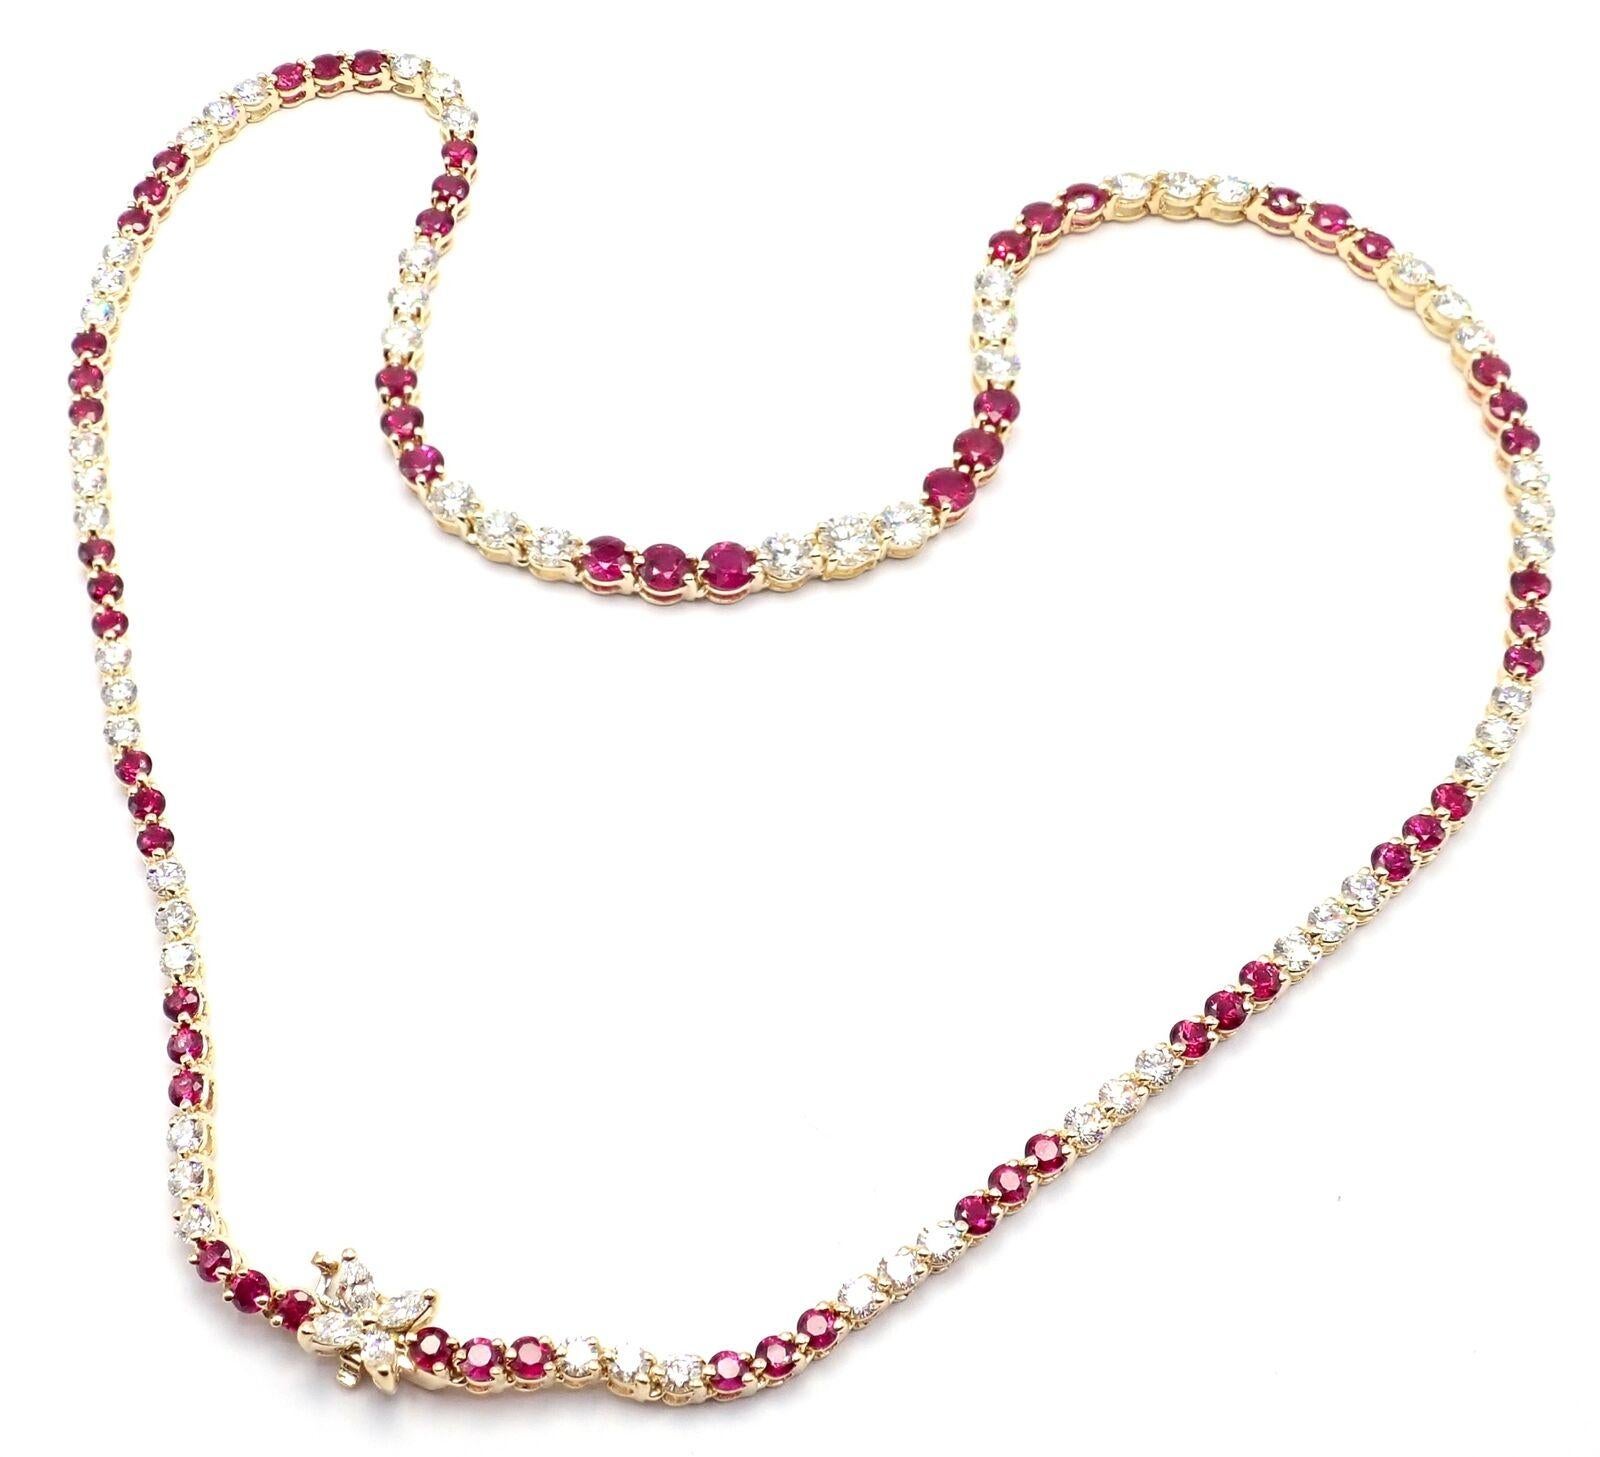 18k Yellow Gold Diamond And Ruby Victoria Line Necklace by Tiffany & Co. 
With 61 Round brilliant cut diamonds and 4 marque cut diamonds VS1 clarity, G color total weight approximately 5.70ct
60 round rubies total weight approximately 7.50ct
This